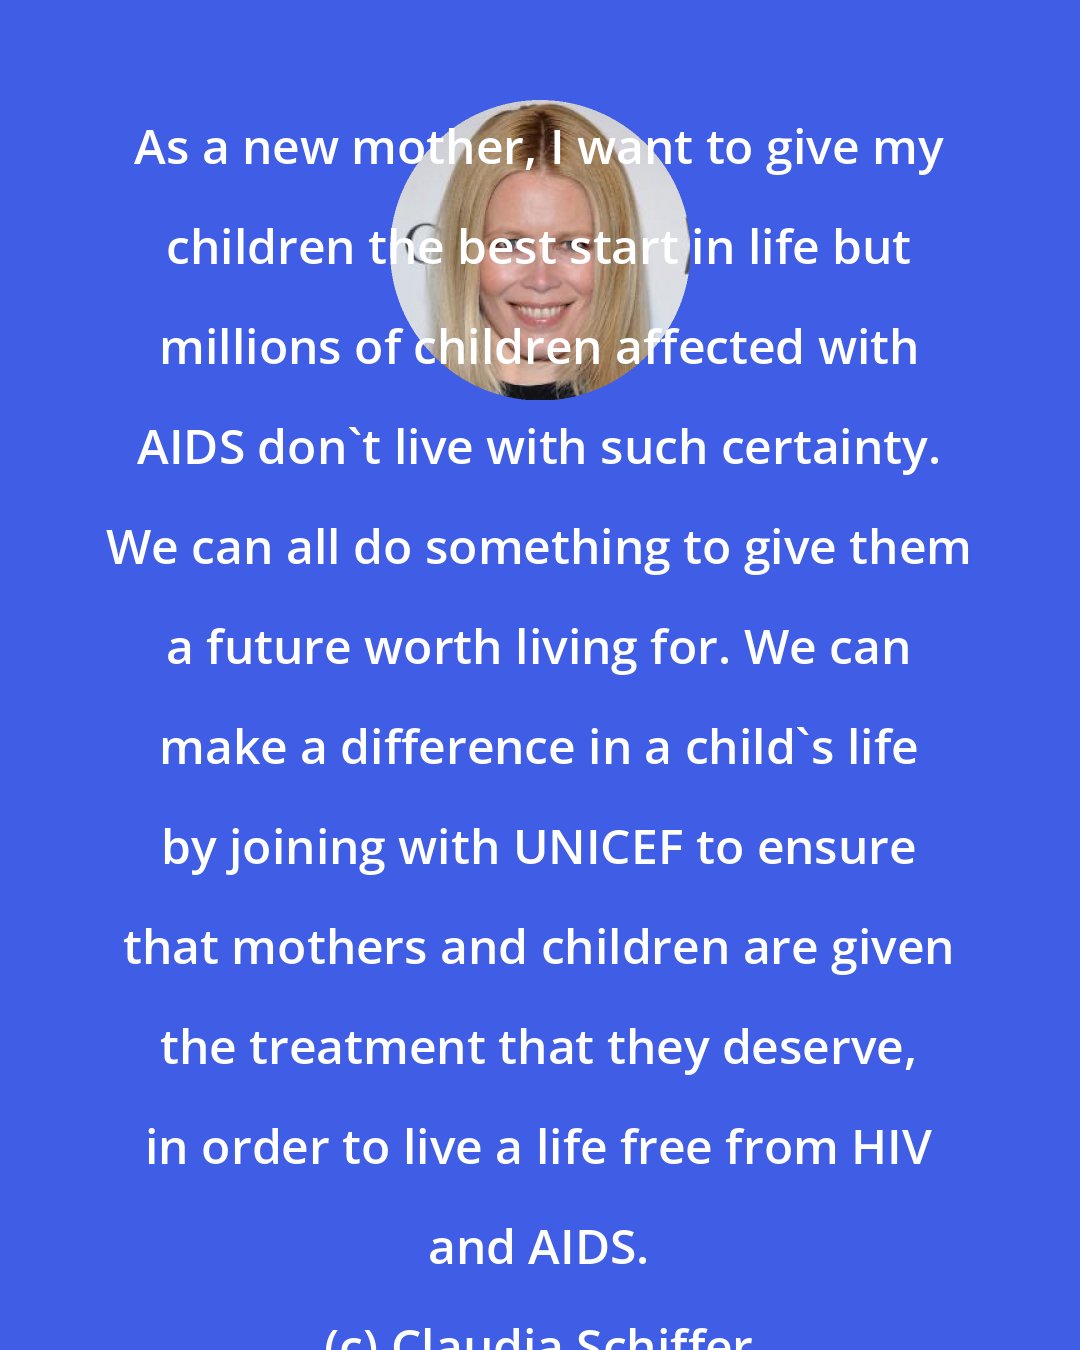 Claudia Schiffer: As a new mother, I want to give my children the best start in life but millions of children affected with AIDS don't live with such certainty. We can all do something to give them a future worth living for. We can make a difference in a child's life by joining with UNICEF to ensure that mothers and children are given the treatment that they deserve, in order to live a life free from HIV and AIDS.